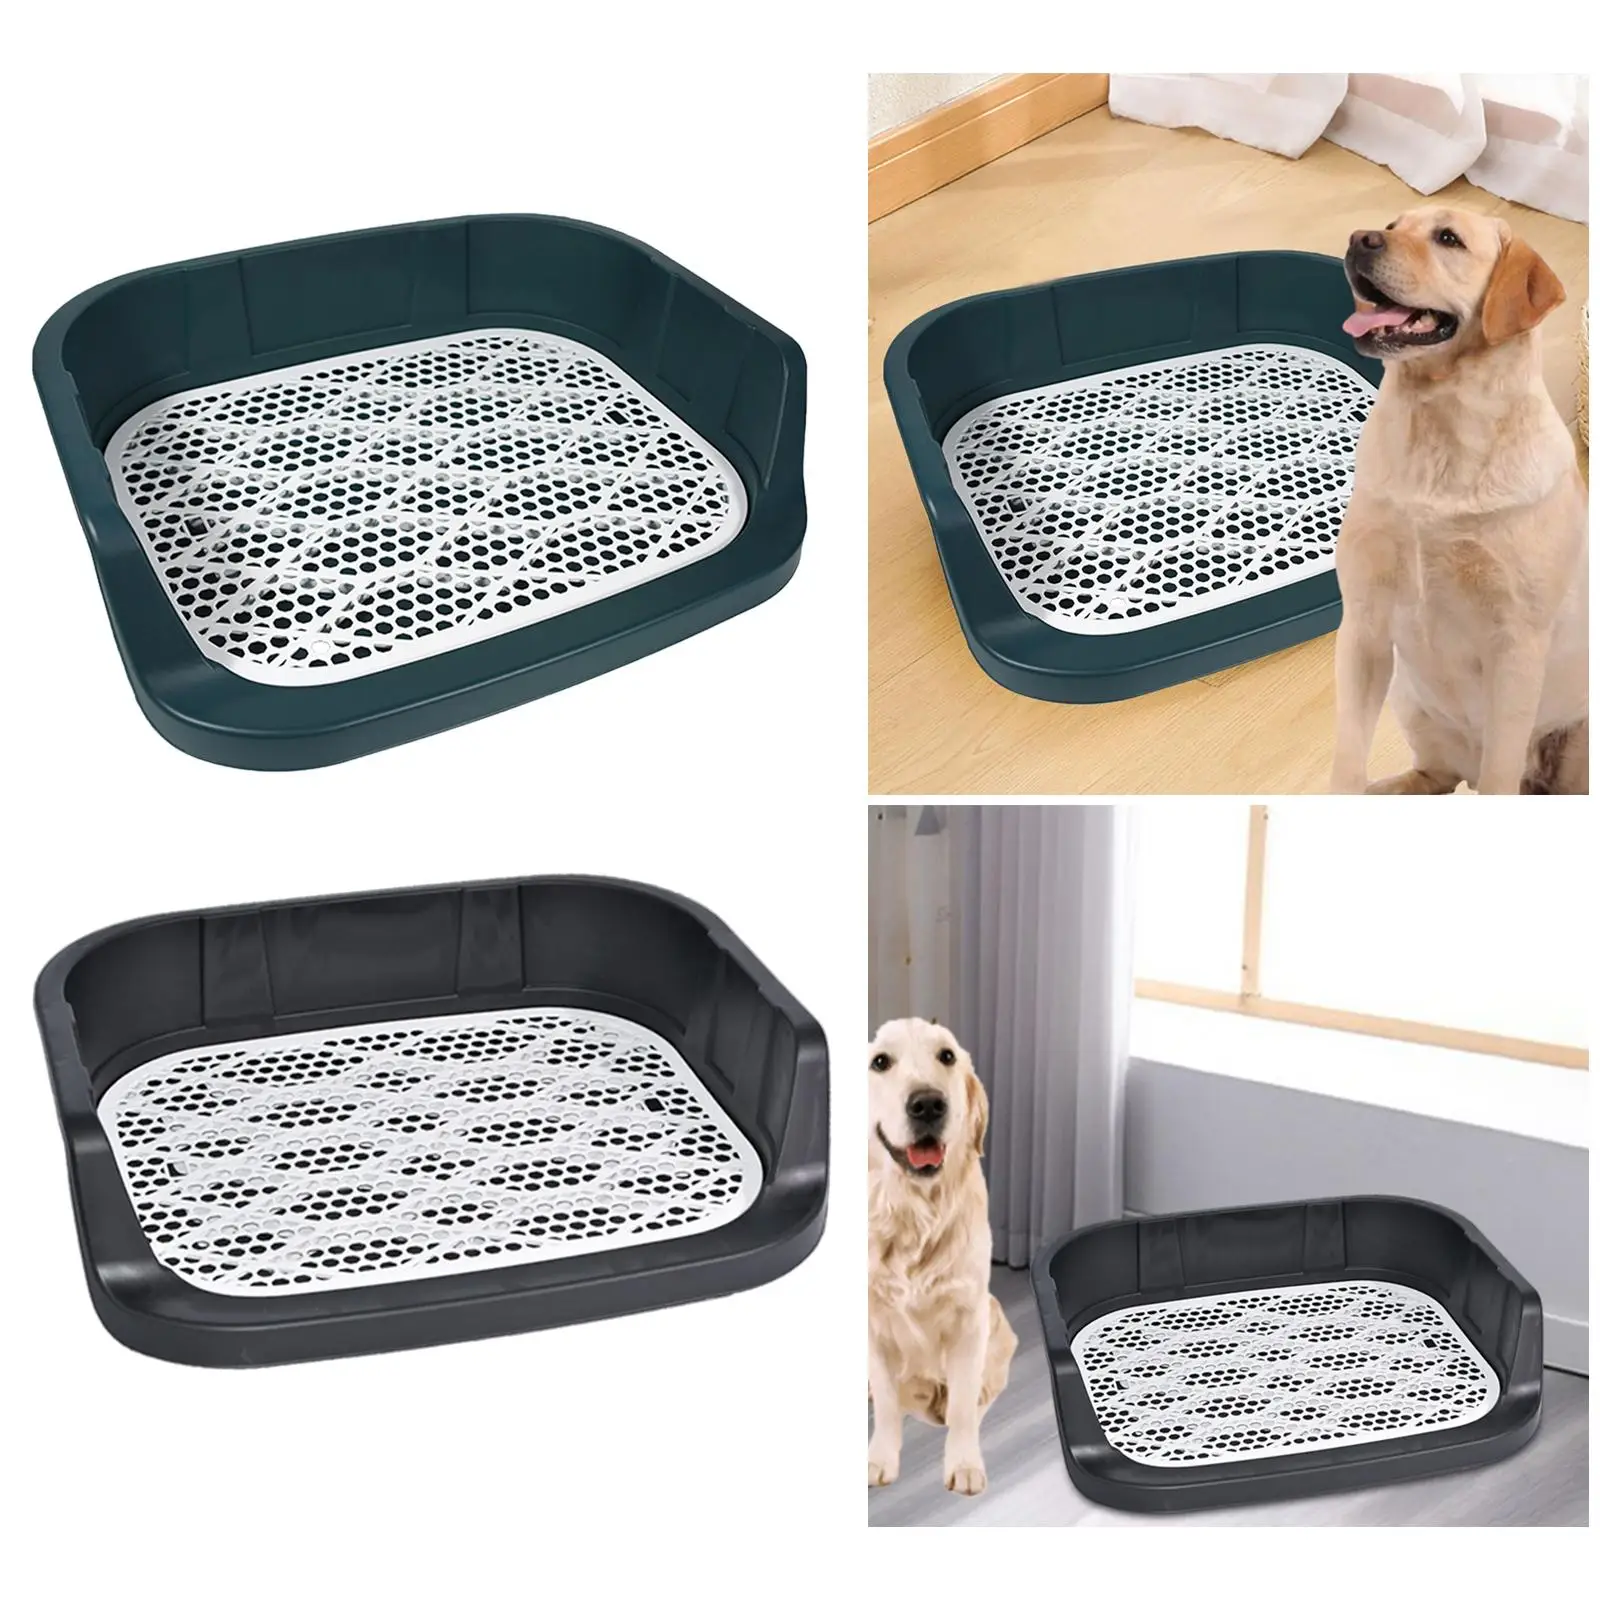 Open Top Dog Litter Box Cats Potty Toilet Container, Deep Pee Loo Pad Holder Pan